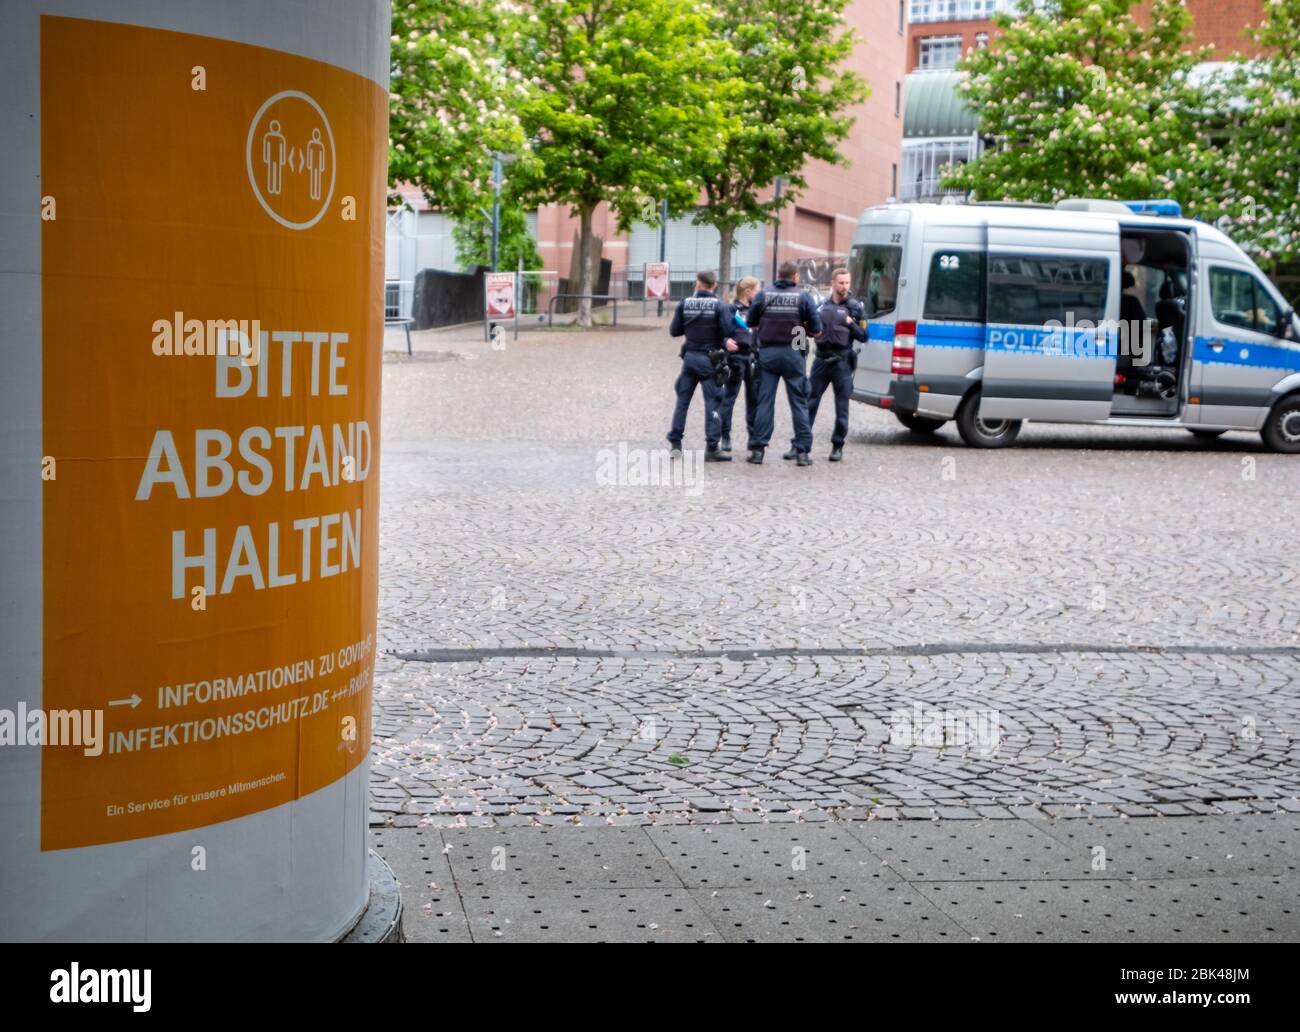 Deutschland. 01st May, 2020. Police control the city center of Karlsruhe, on the left a poster with the words 'Please keep your distance' GES/Daily life in (Karlsruhe) during the corona crisis, 01.05.2020 GES/Daily life during the corona crisis in Karlsruhe, Germany. 01.05.2020 | usage worldwide Credit: dpa/Alamy Live News Stock Photo